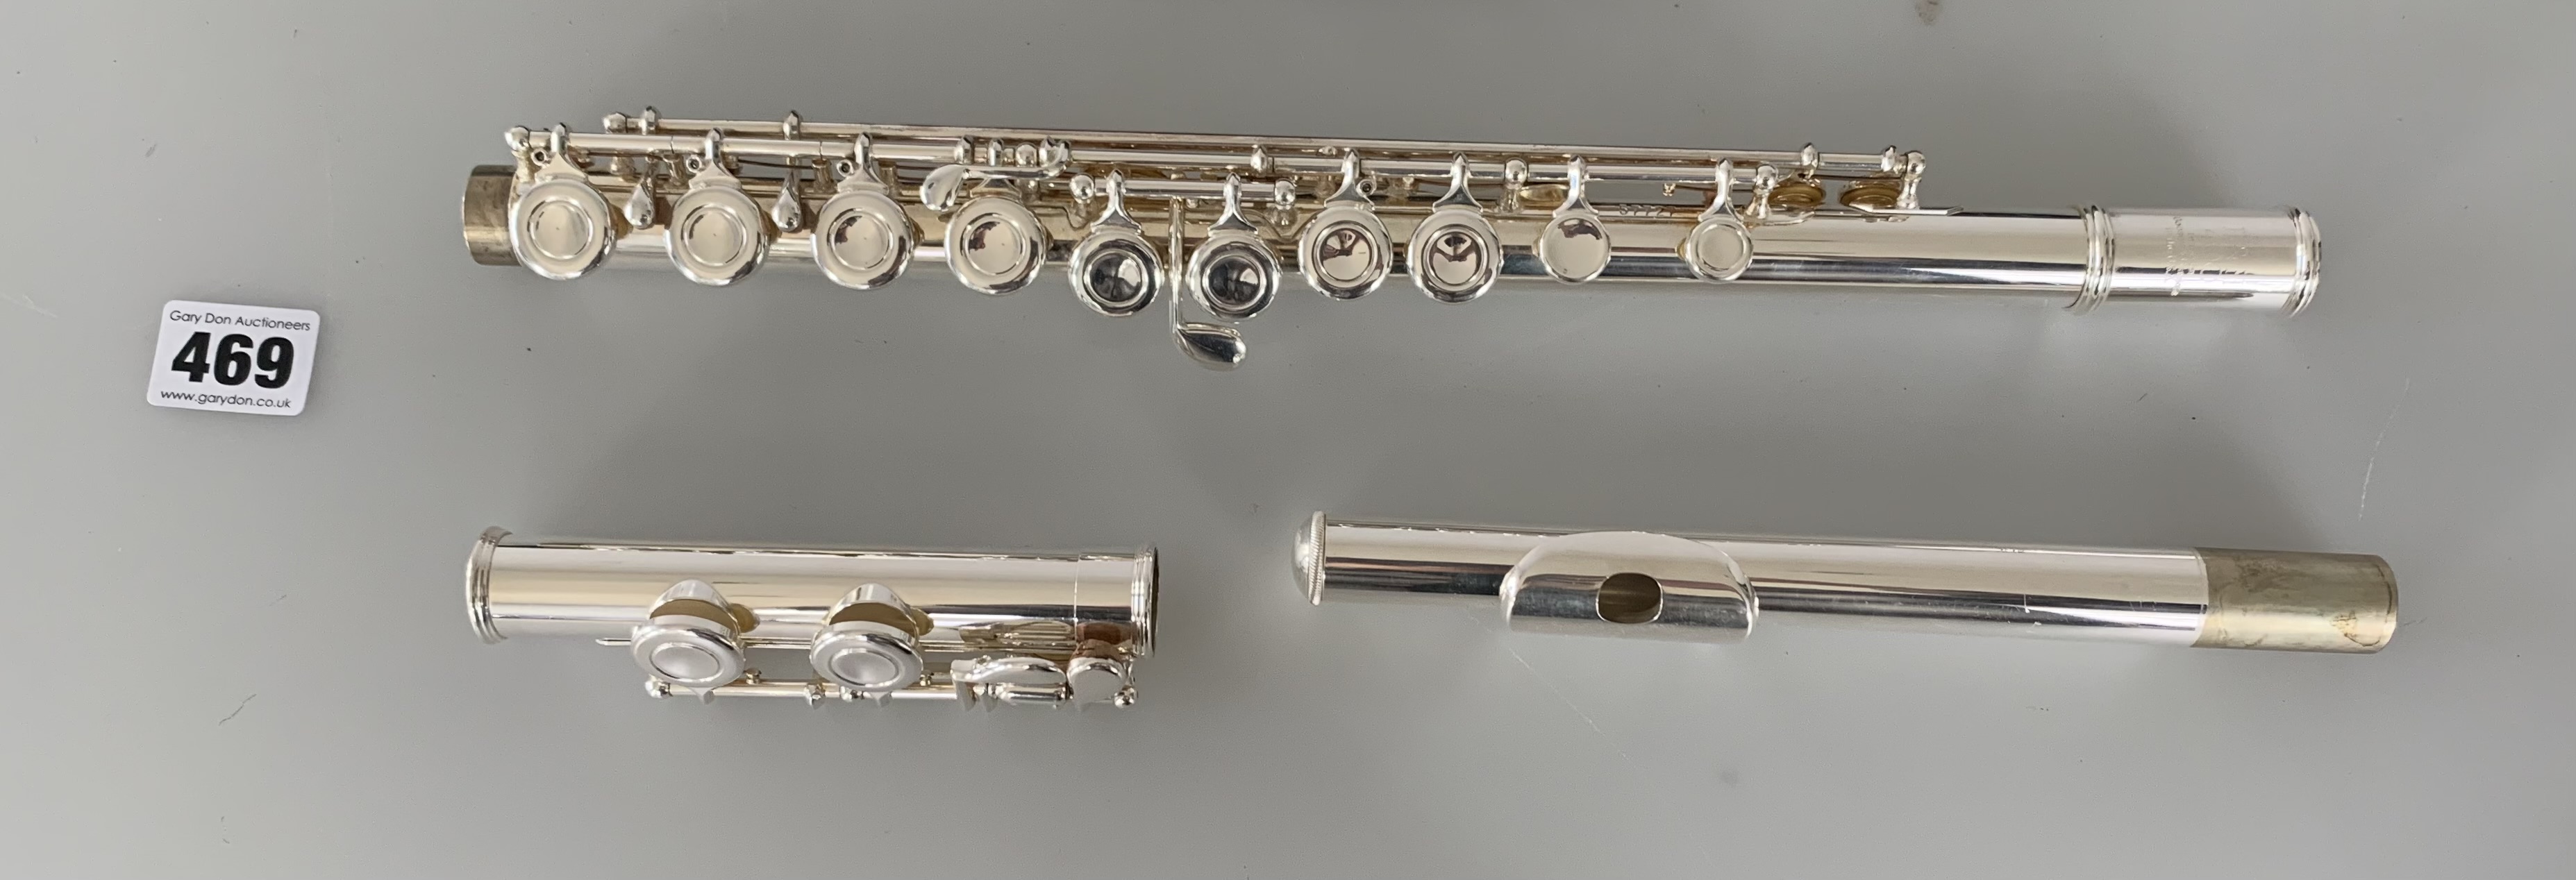 Boosey & Hawkes 400 flute in hard case - Image 2 of 4